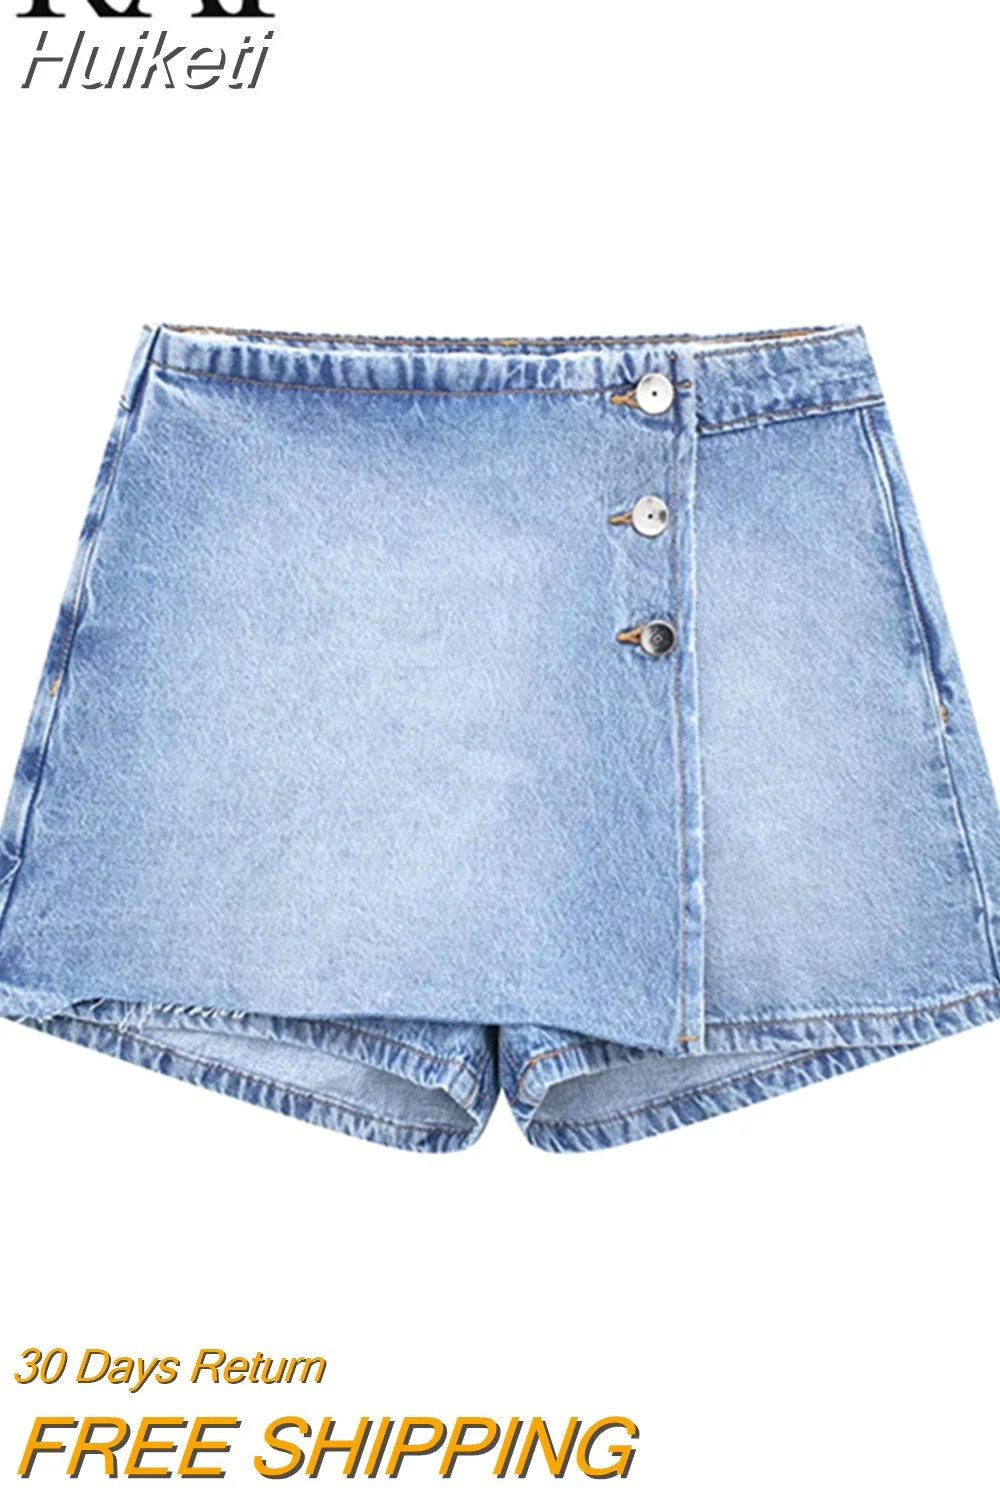 Huiketi 2023 Summer Fashion Woman Skirt Shorts With Buttons Zipper Slim High-Waisted A-line Denim Shorts Female Casual Jeans